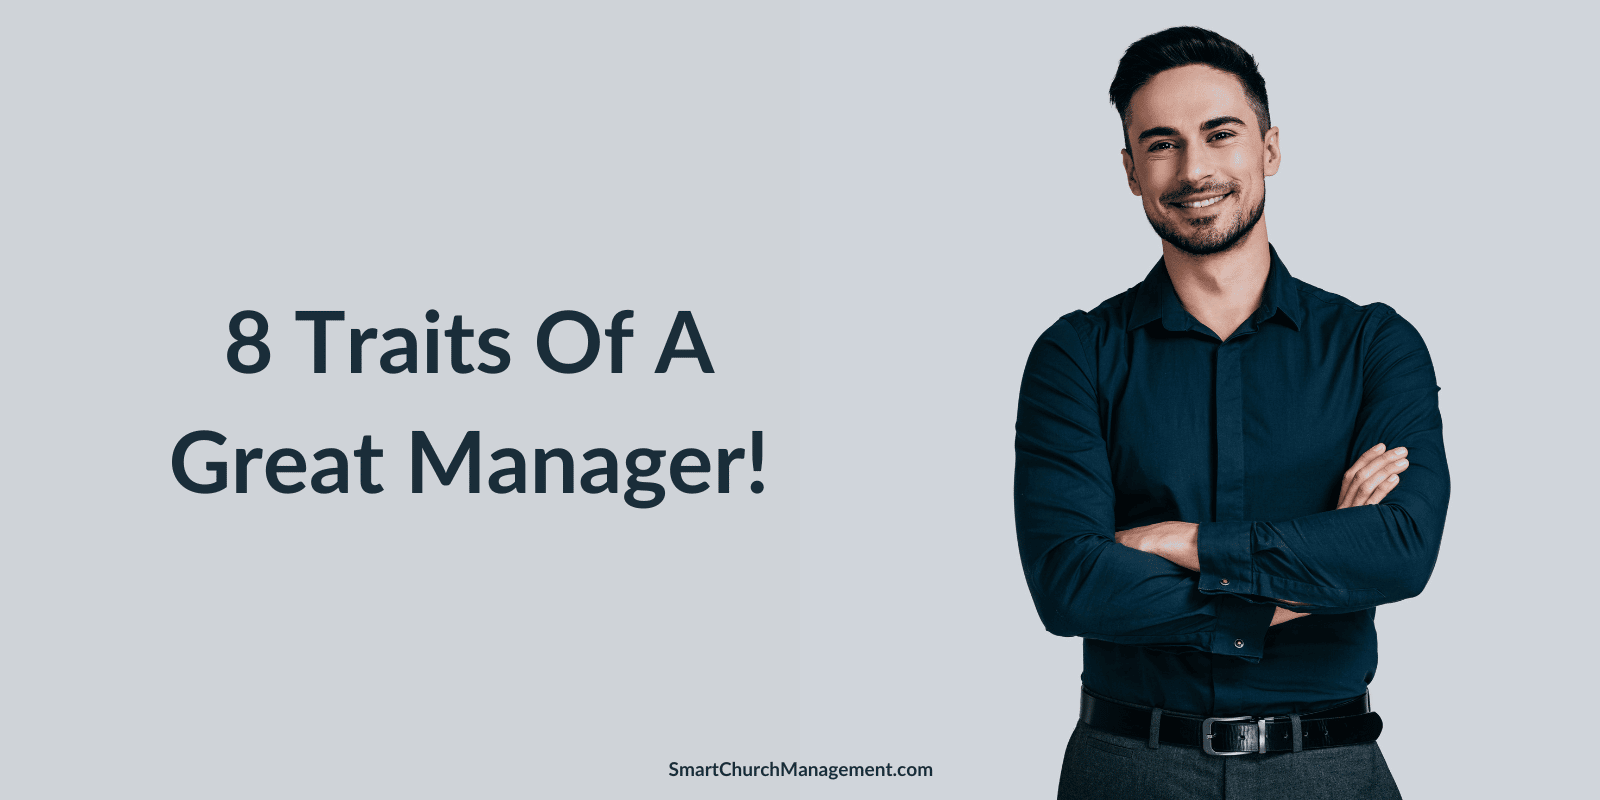 Learn traits of being a great manager